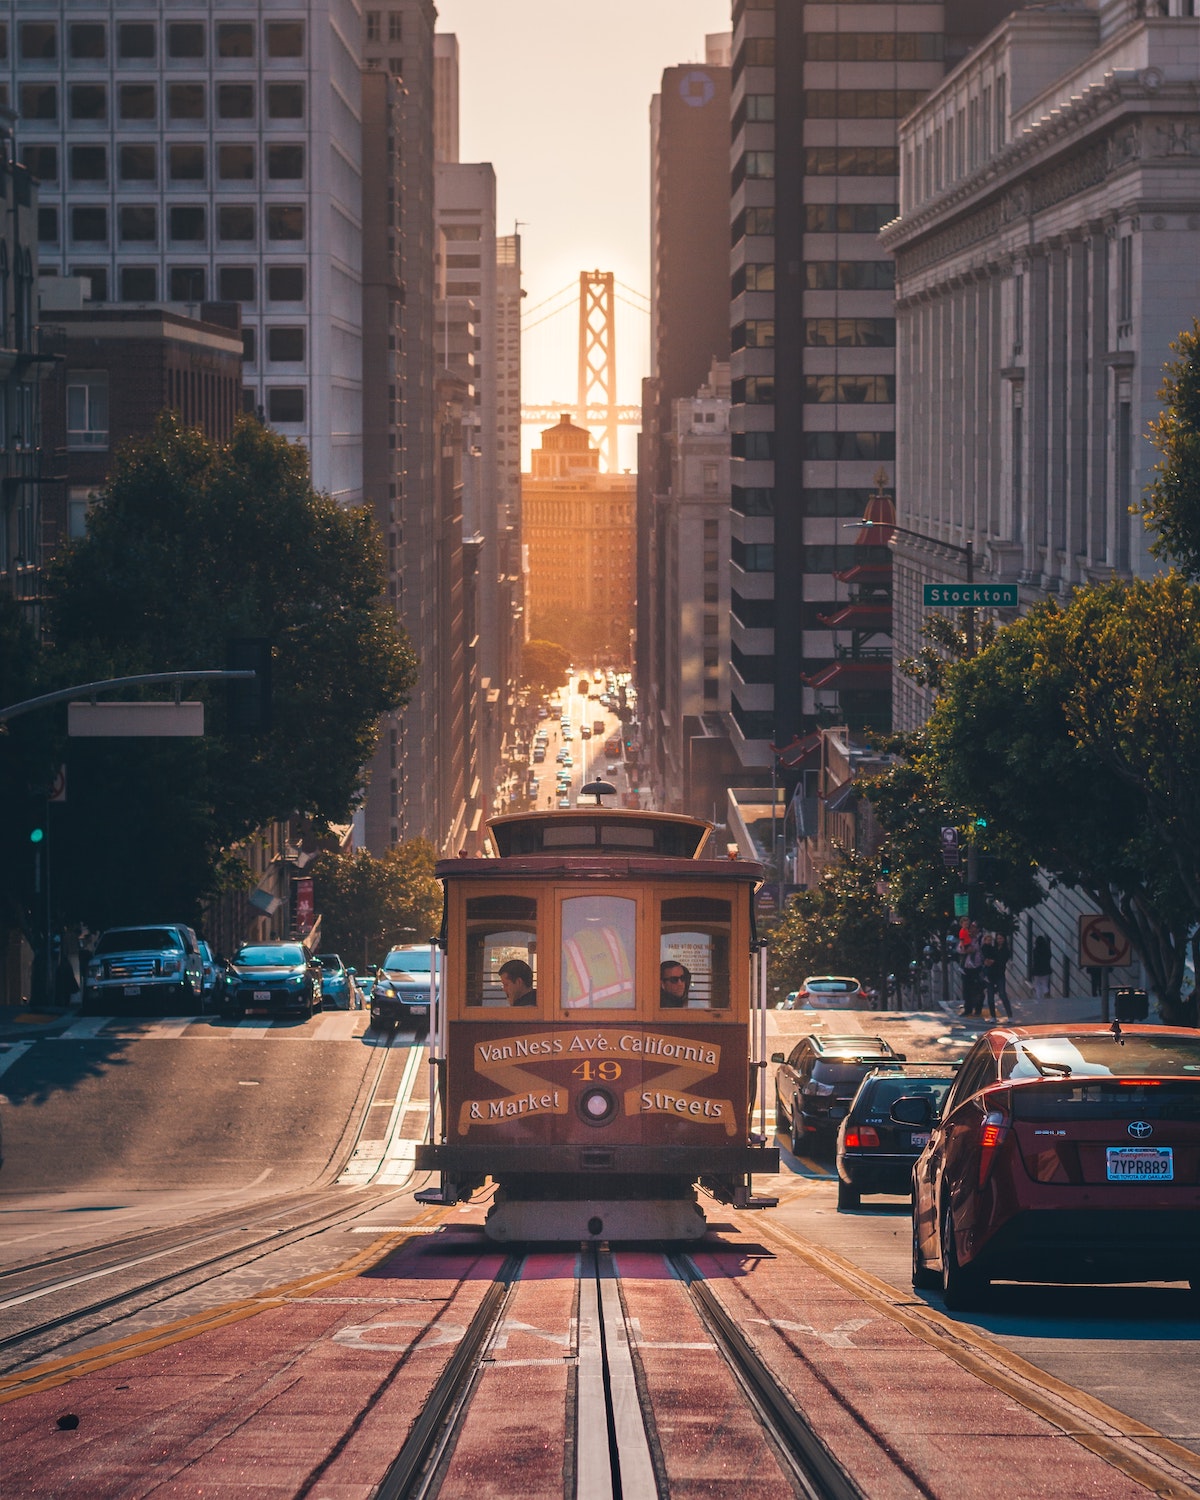 A view of cable car on a sloping street in San Francisco with a bridge in the background peeking in between buildings 